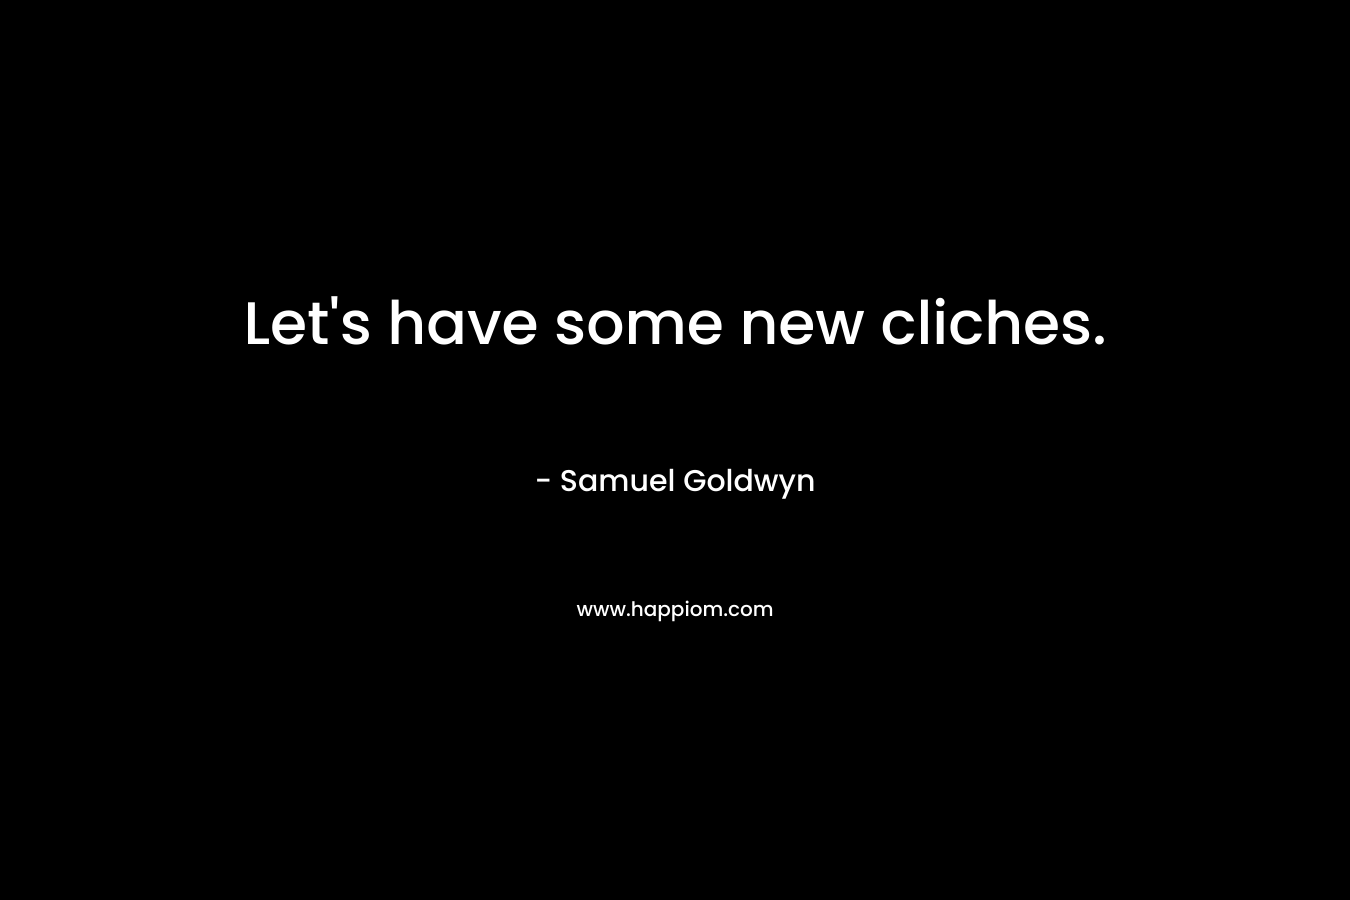 Let’s have some new cliches. – Samuel Goldwyn